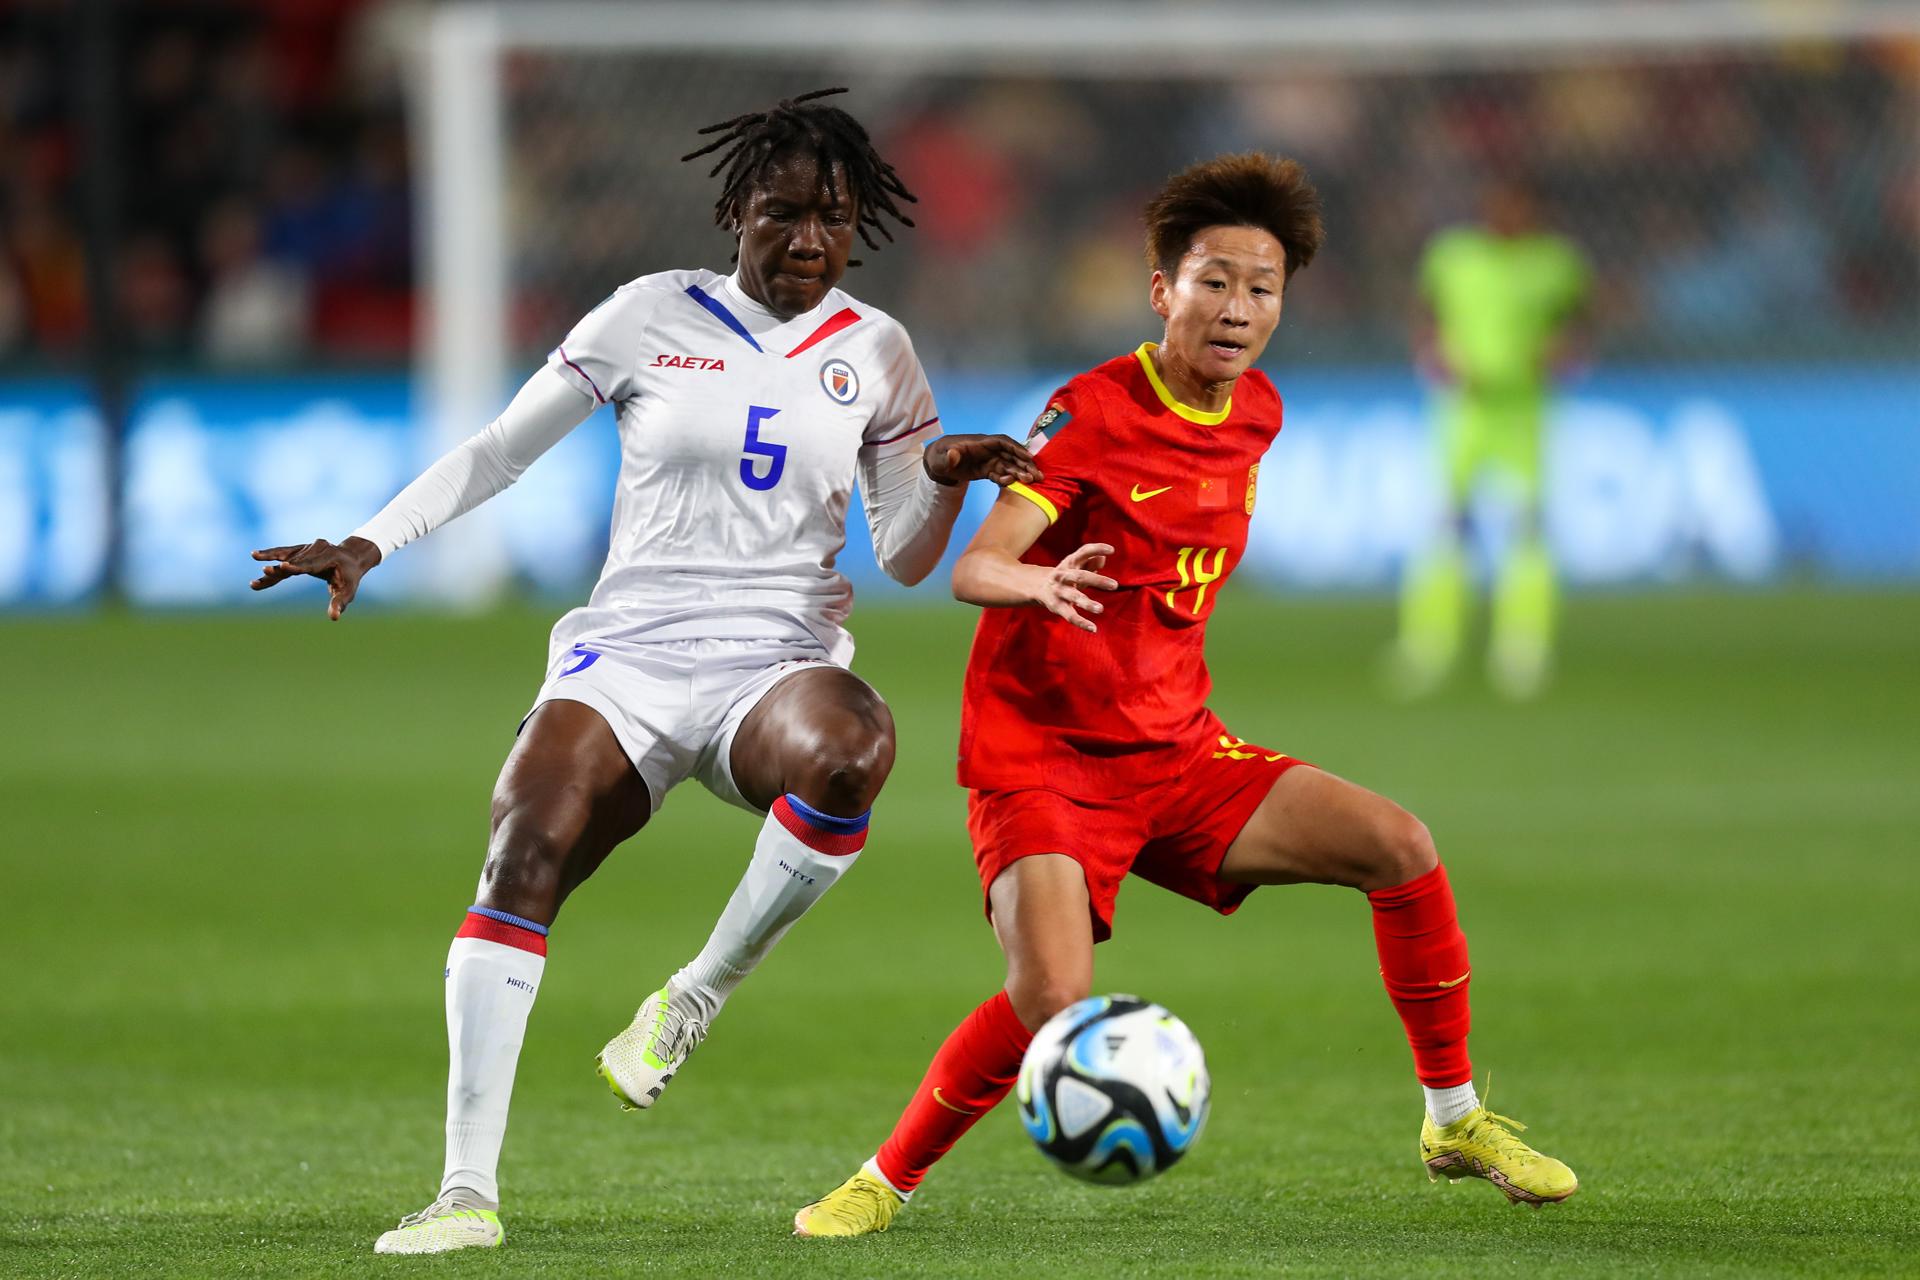 Haiti's Maudeline Moryl (L) vies for the ball with Jiahui Lou of China during the FIFA Women's World Cup Group D match in Adelaide, Australia. EFE/EPA/MATT TURNER AUSTRALIA AND NEW ZEALAND OUT EDITORIAL USE ONLY
